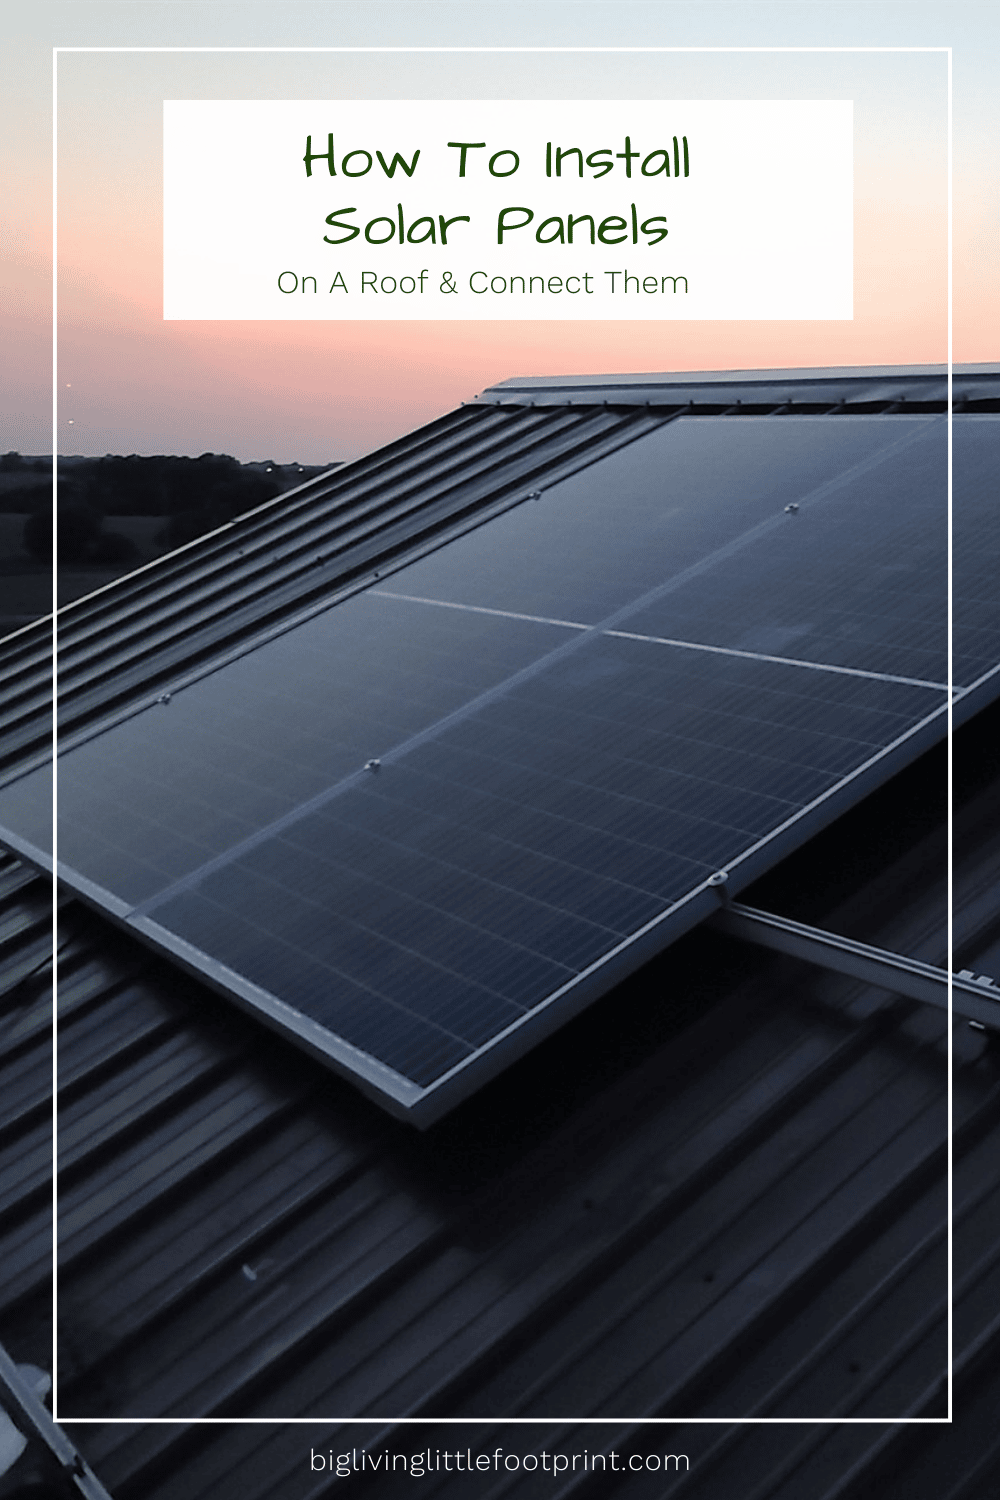 How To Install Solar Panels On A Roof & Connect Them